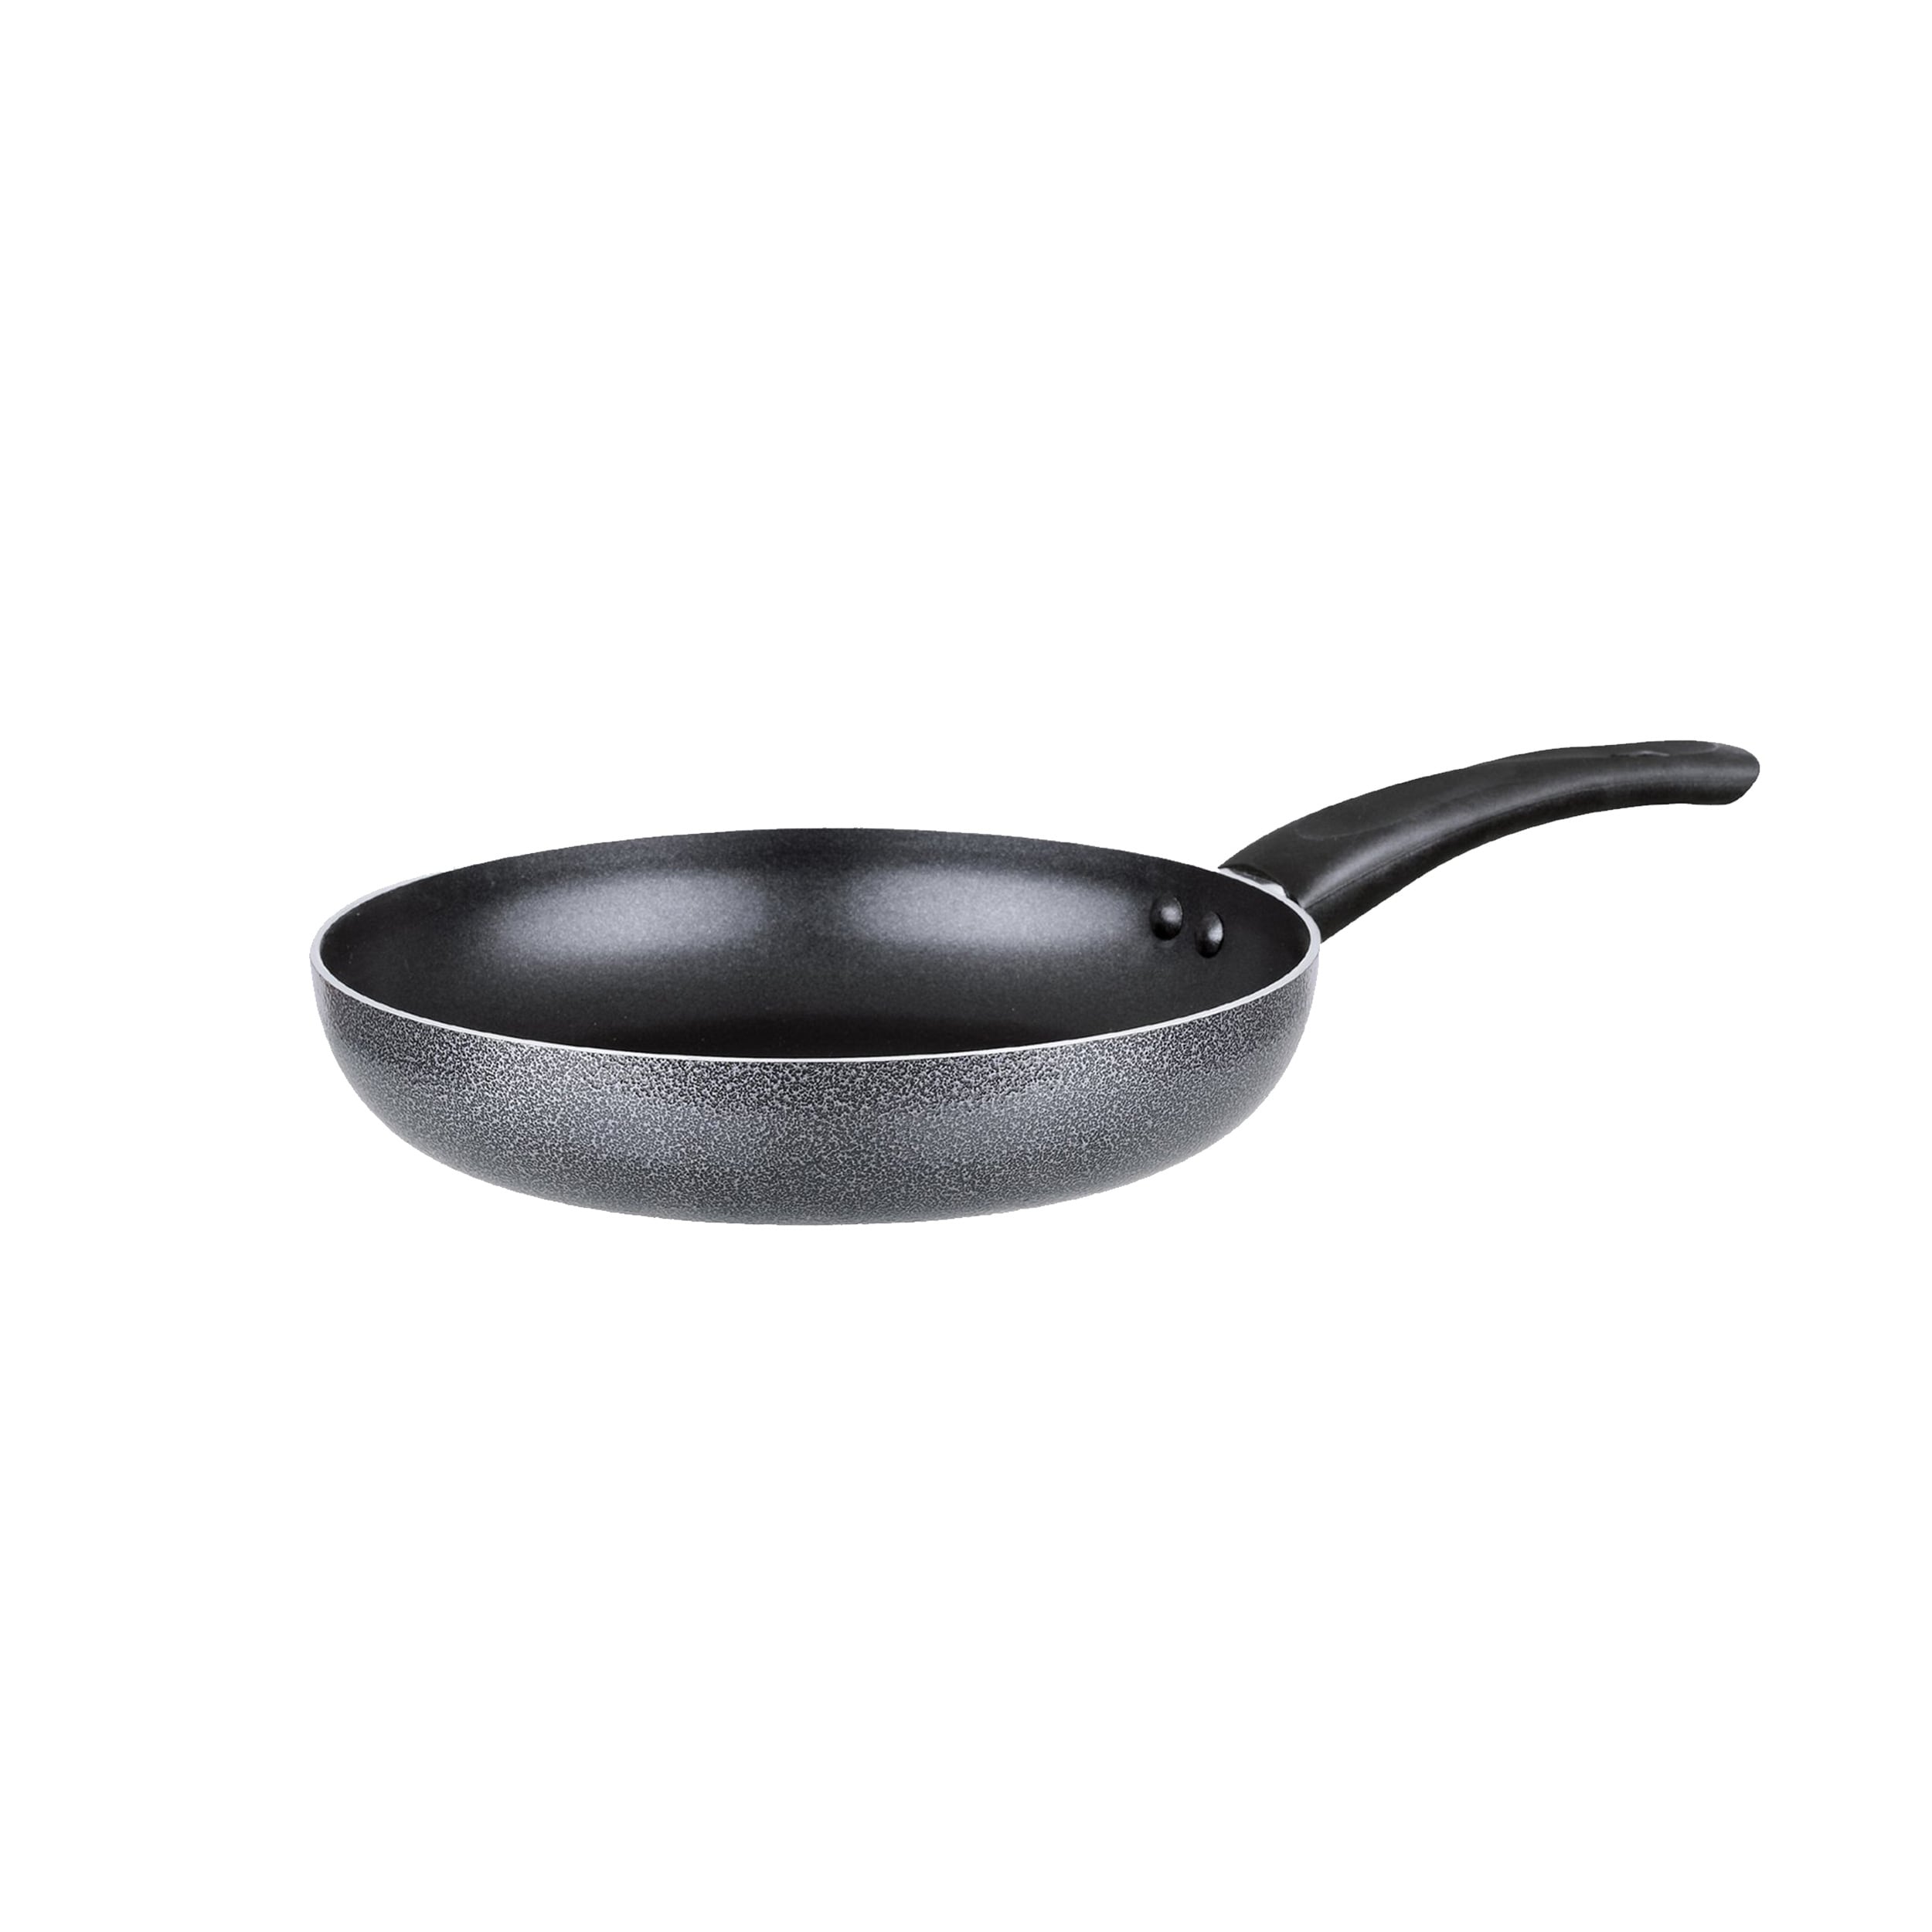 https://ak1.ostkcdn.com/images/products/is/images/direct/120367a8cf0782e1aad491c565529570d853682b/Brentwood-Wok-Aluminum-Non-Stick-9.5%22-Gray.jpg